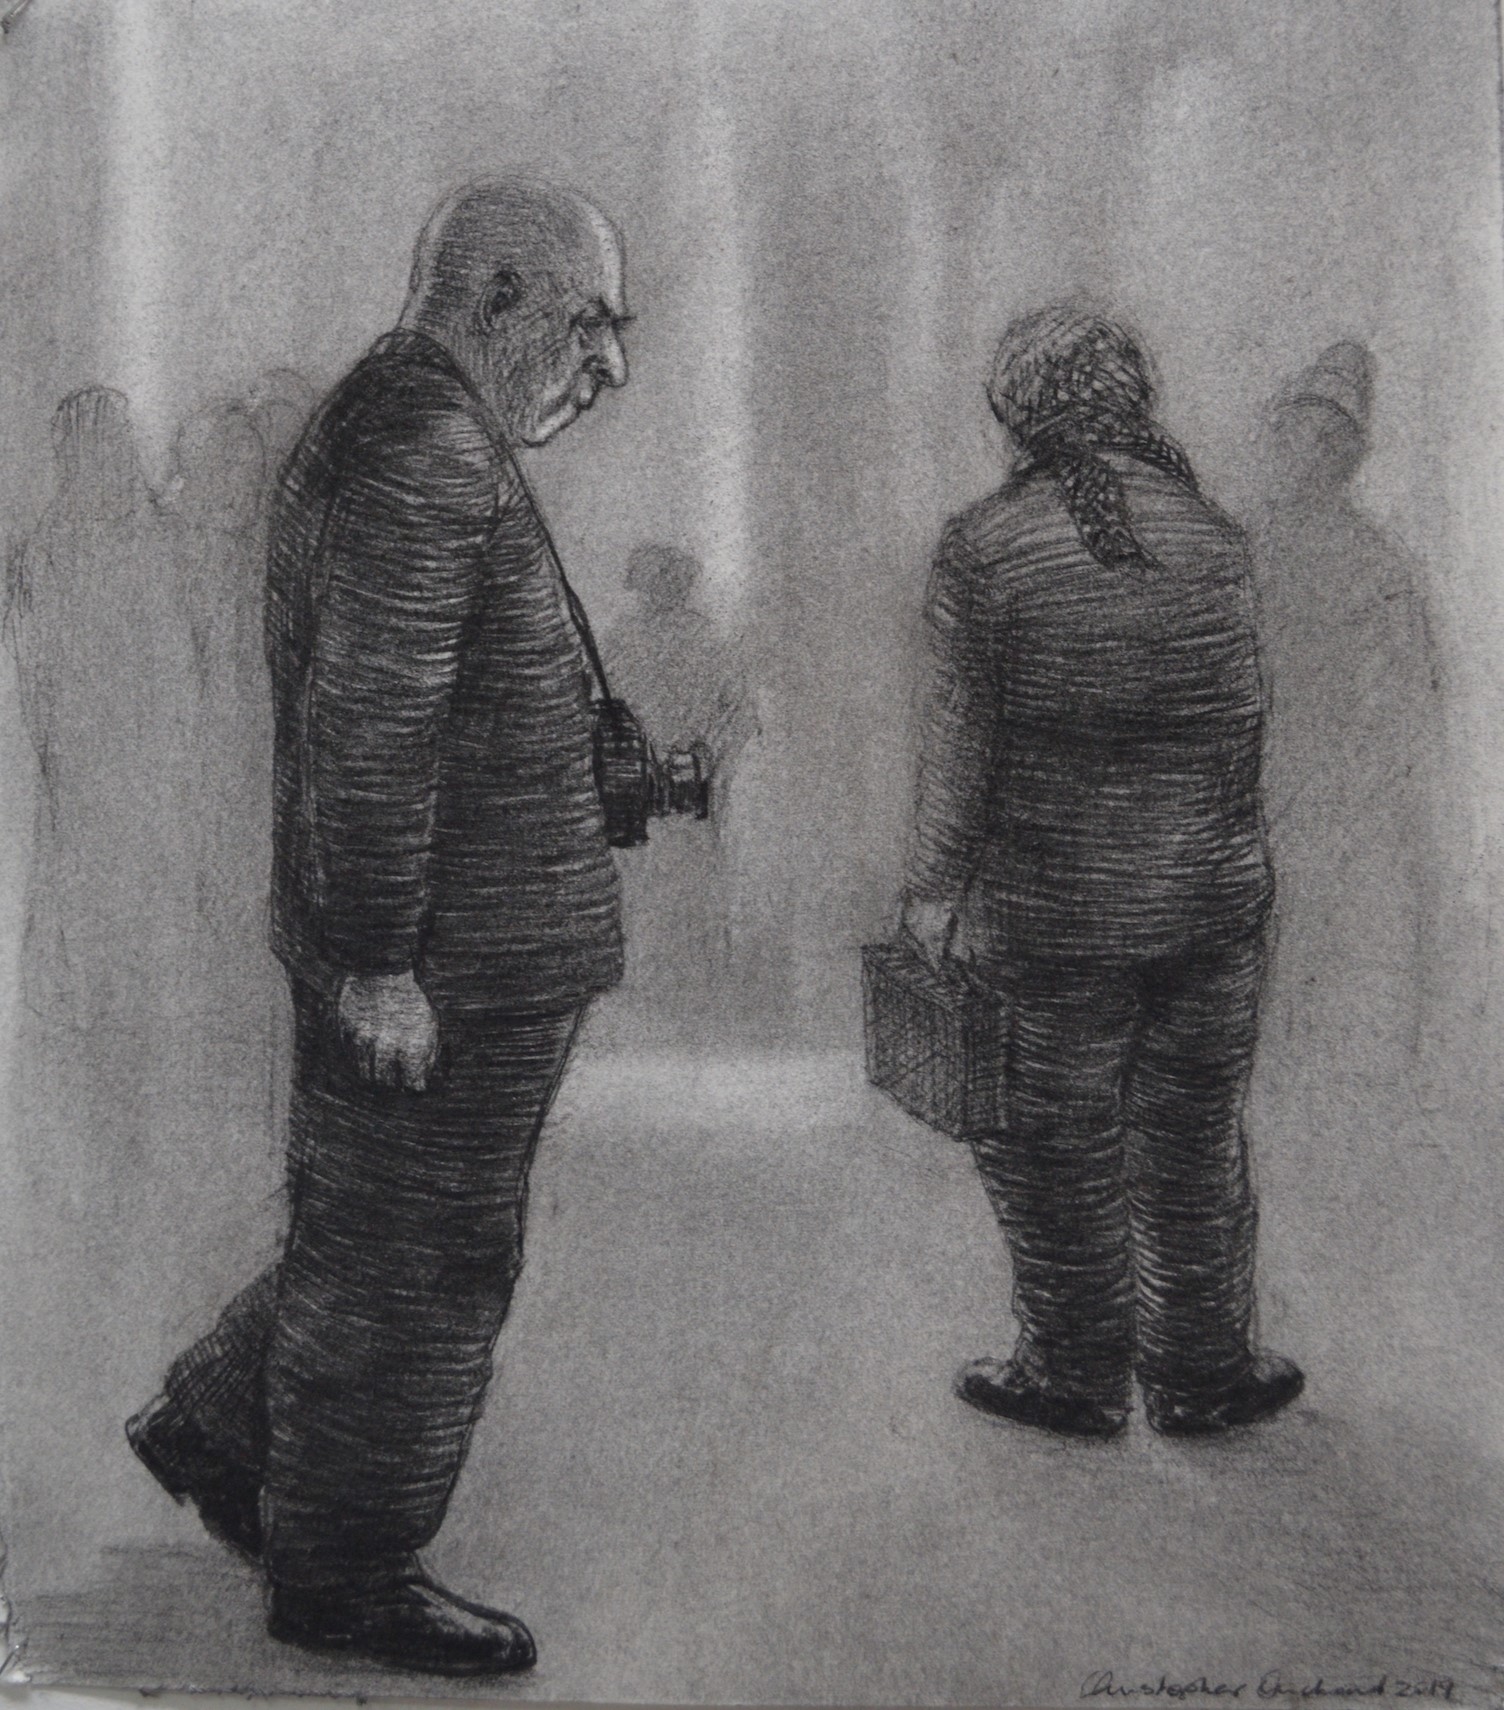 Christopher Orchard 'Parallel Histories' charcoal on paper on canvas 31 x 28cm $2,200